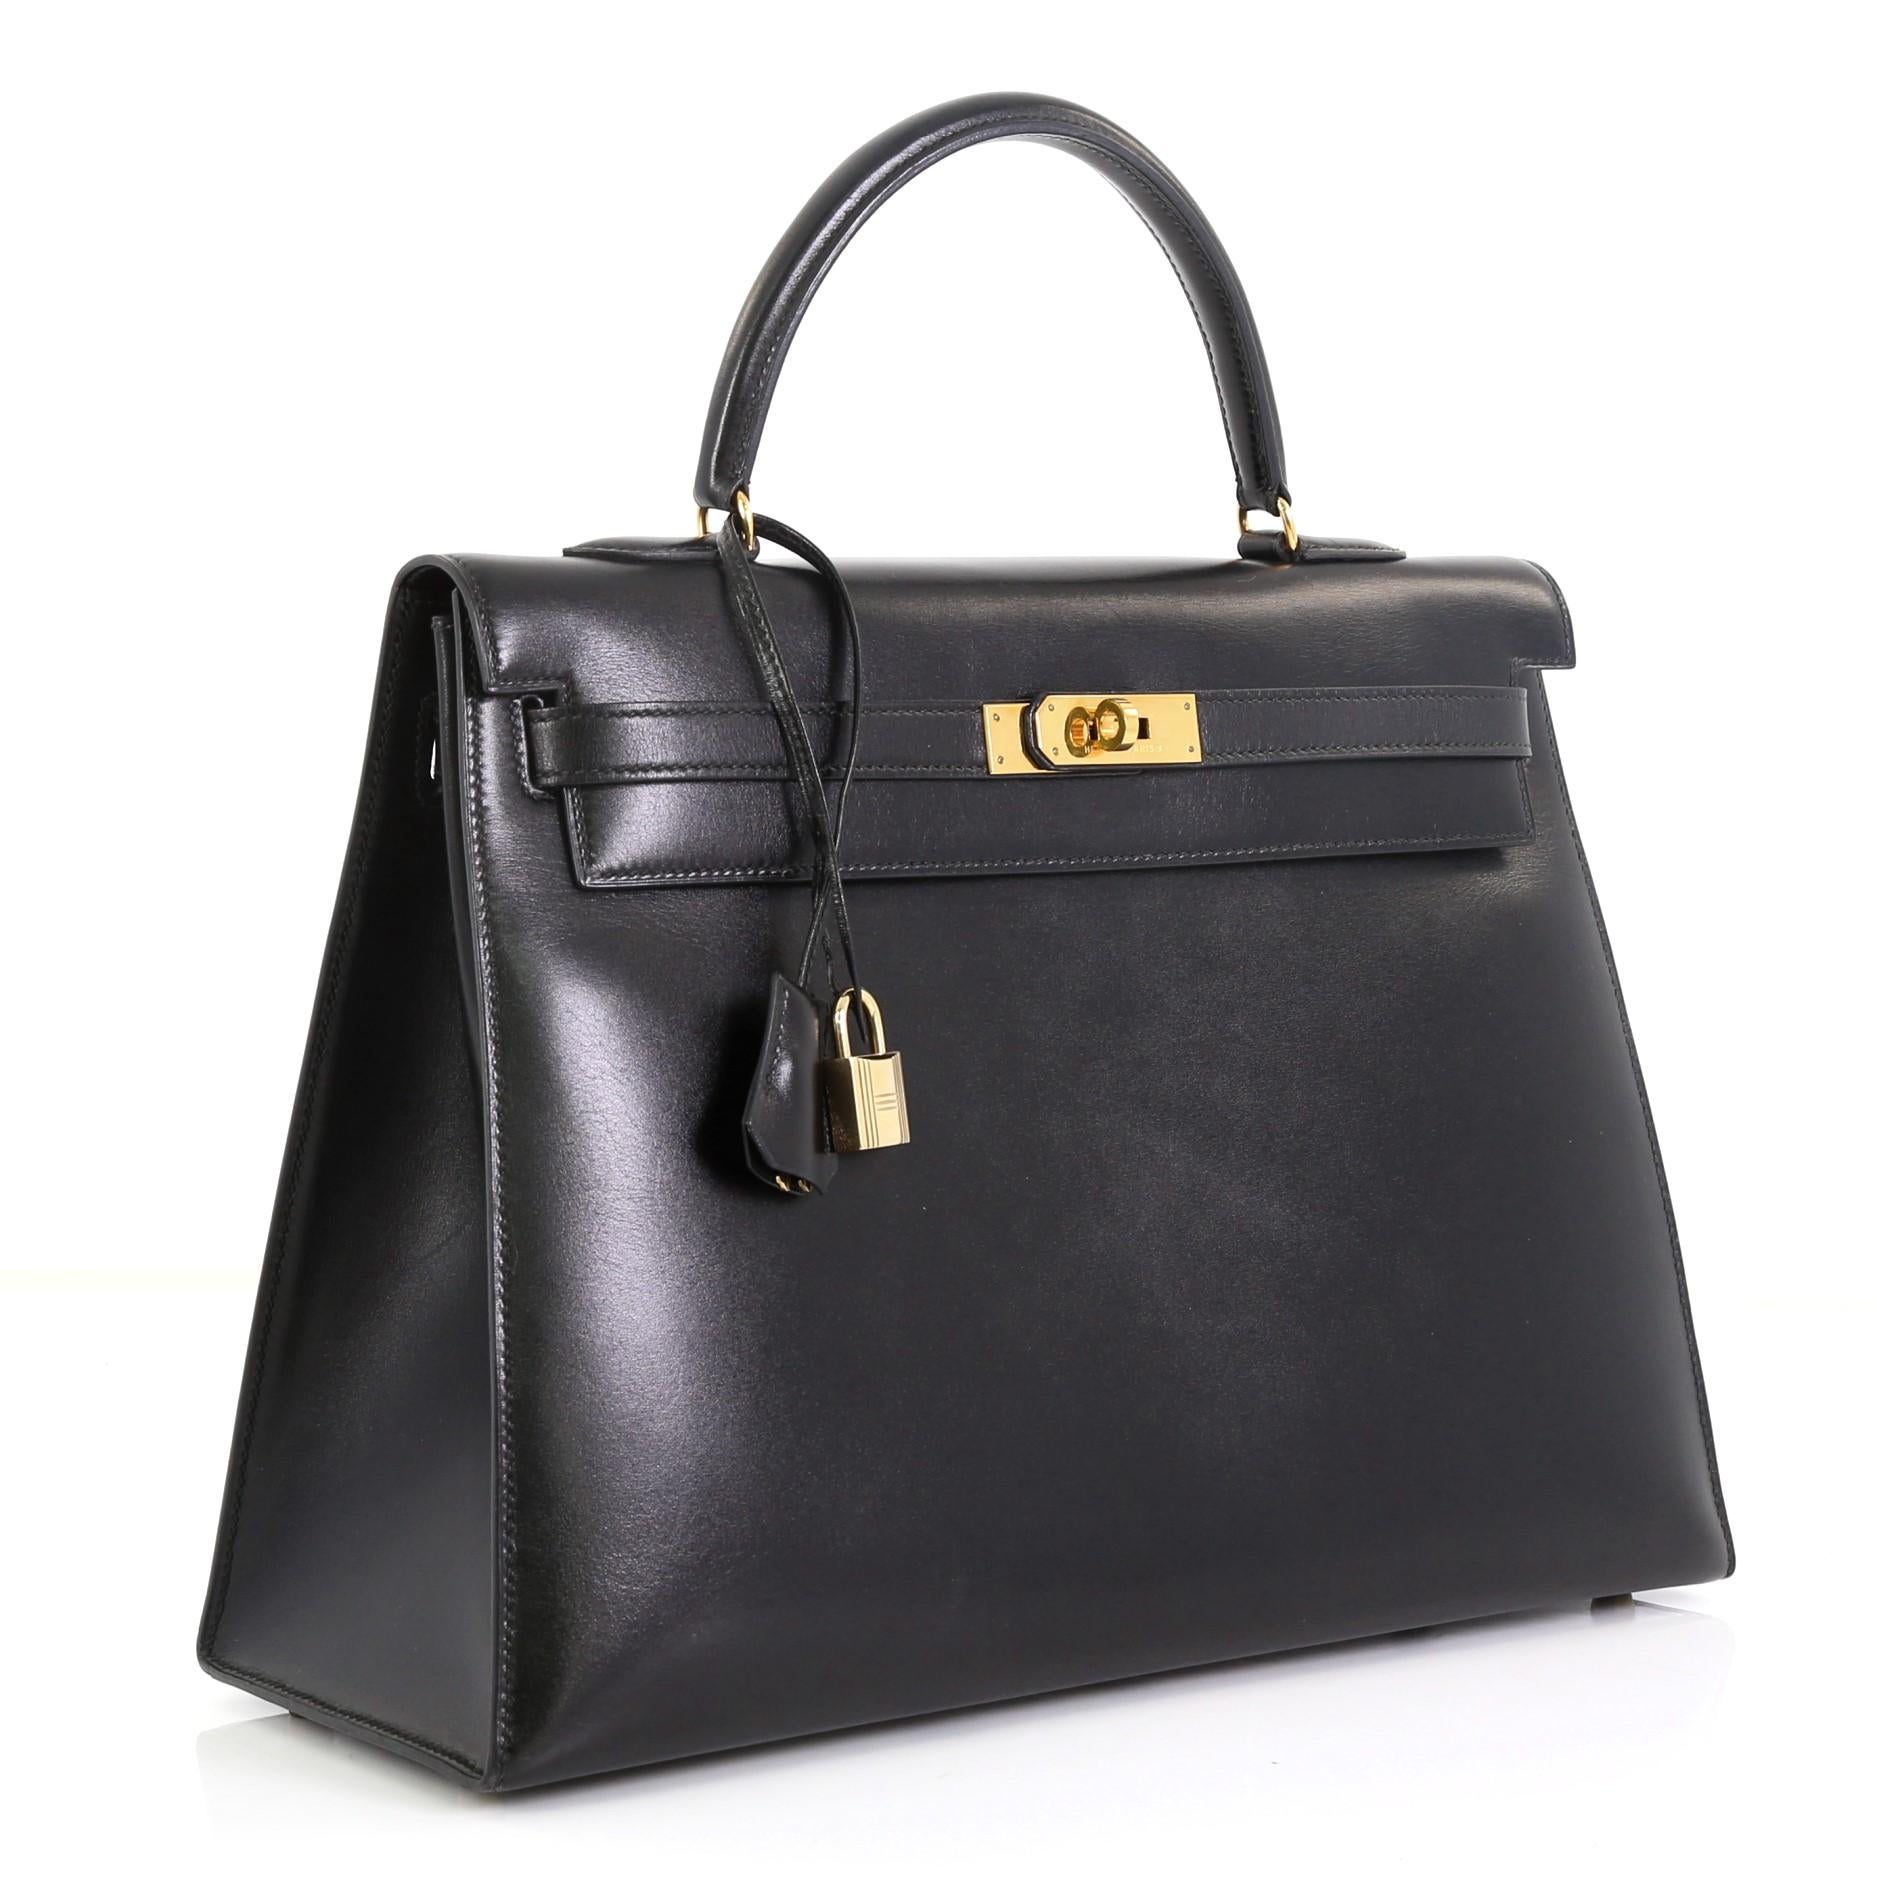 This Hermes Kelly Handbag Noir Box Calf with Gold Hardware 35, crafted from Noir black Box Calf leather, features a single top handle and gold hardware. Its turn-lock closure opens to a Noir black Chevre leather interior with zip and slip pockets.